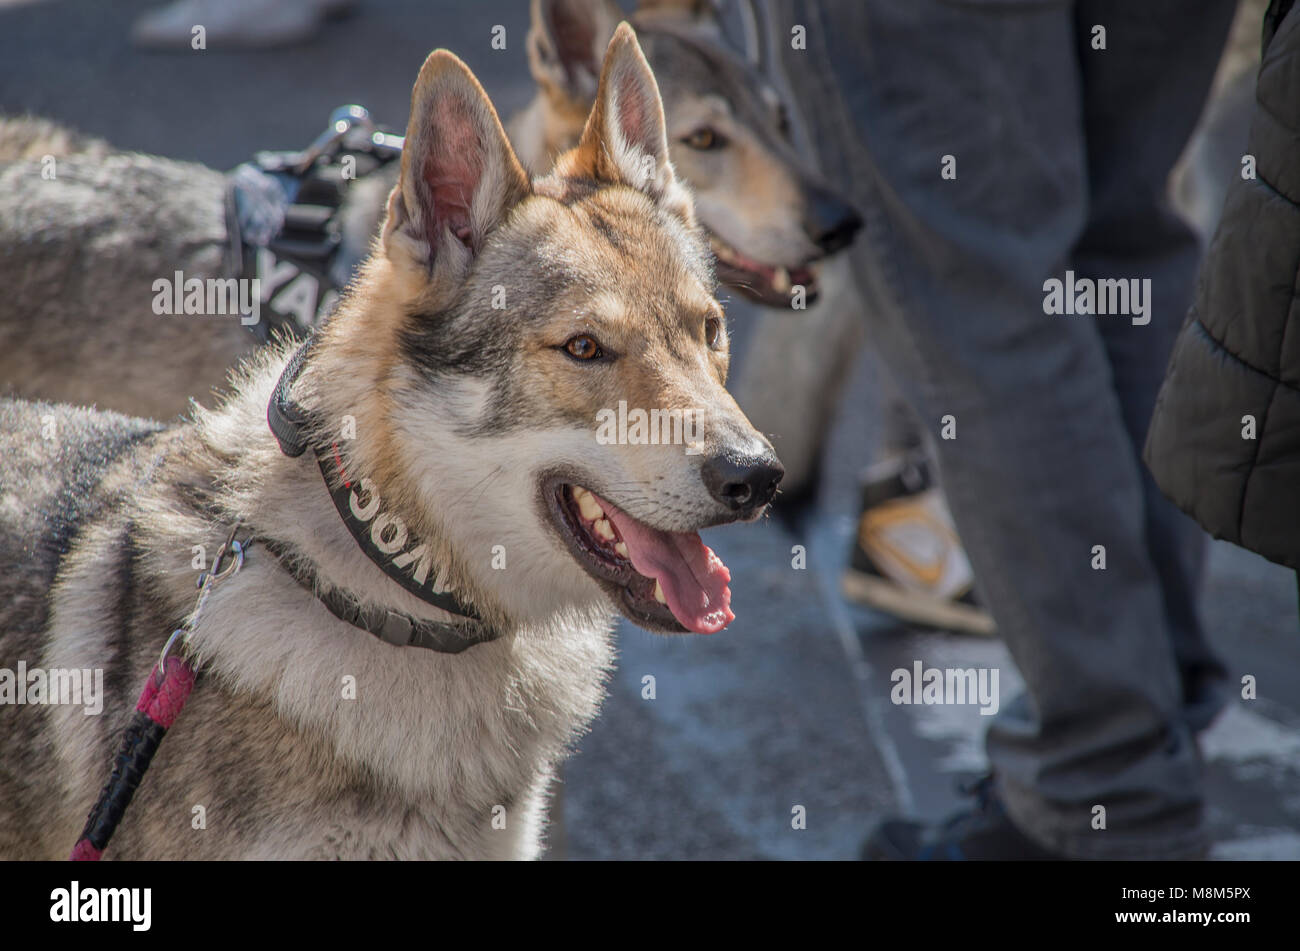 Madrid, Spain. 18th March, 2018. Animal organizations gathered hundreds of people to protest against the extermination of the Iberian Woolf, an endangered especies. Credit: Lora Grigorova/Alamy Live News Credit: Lora Grigorova/Alamy Live News Stock Photo